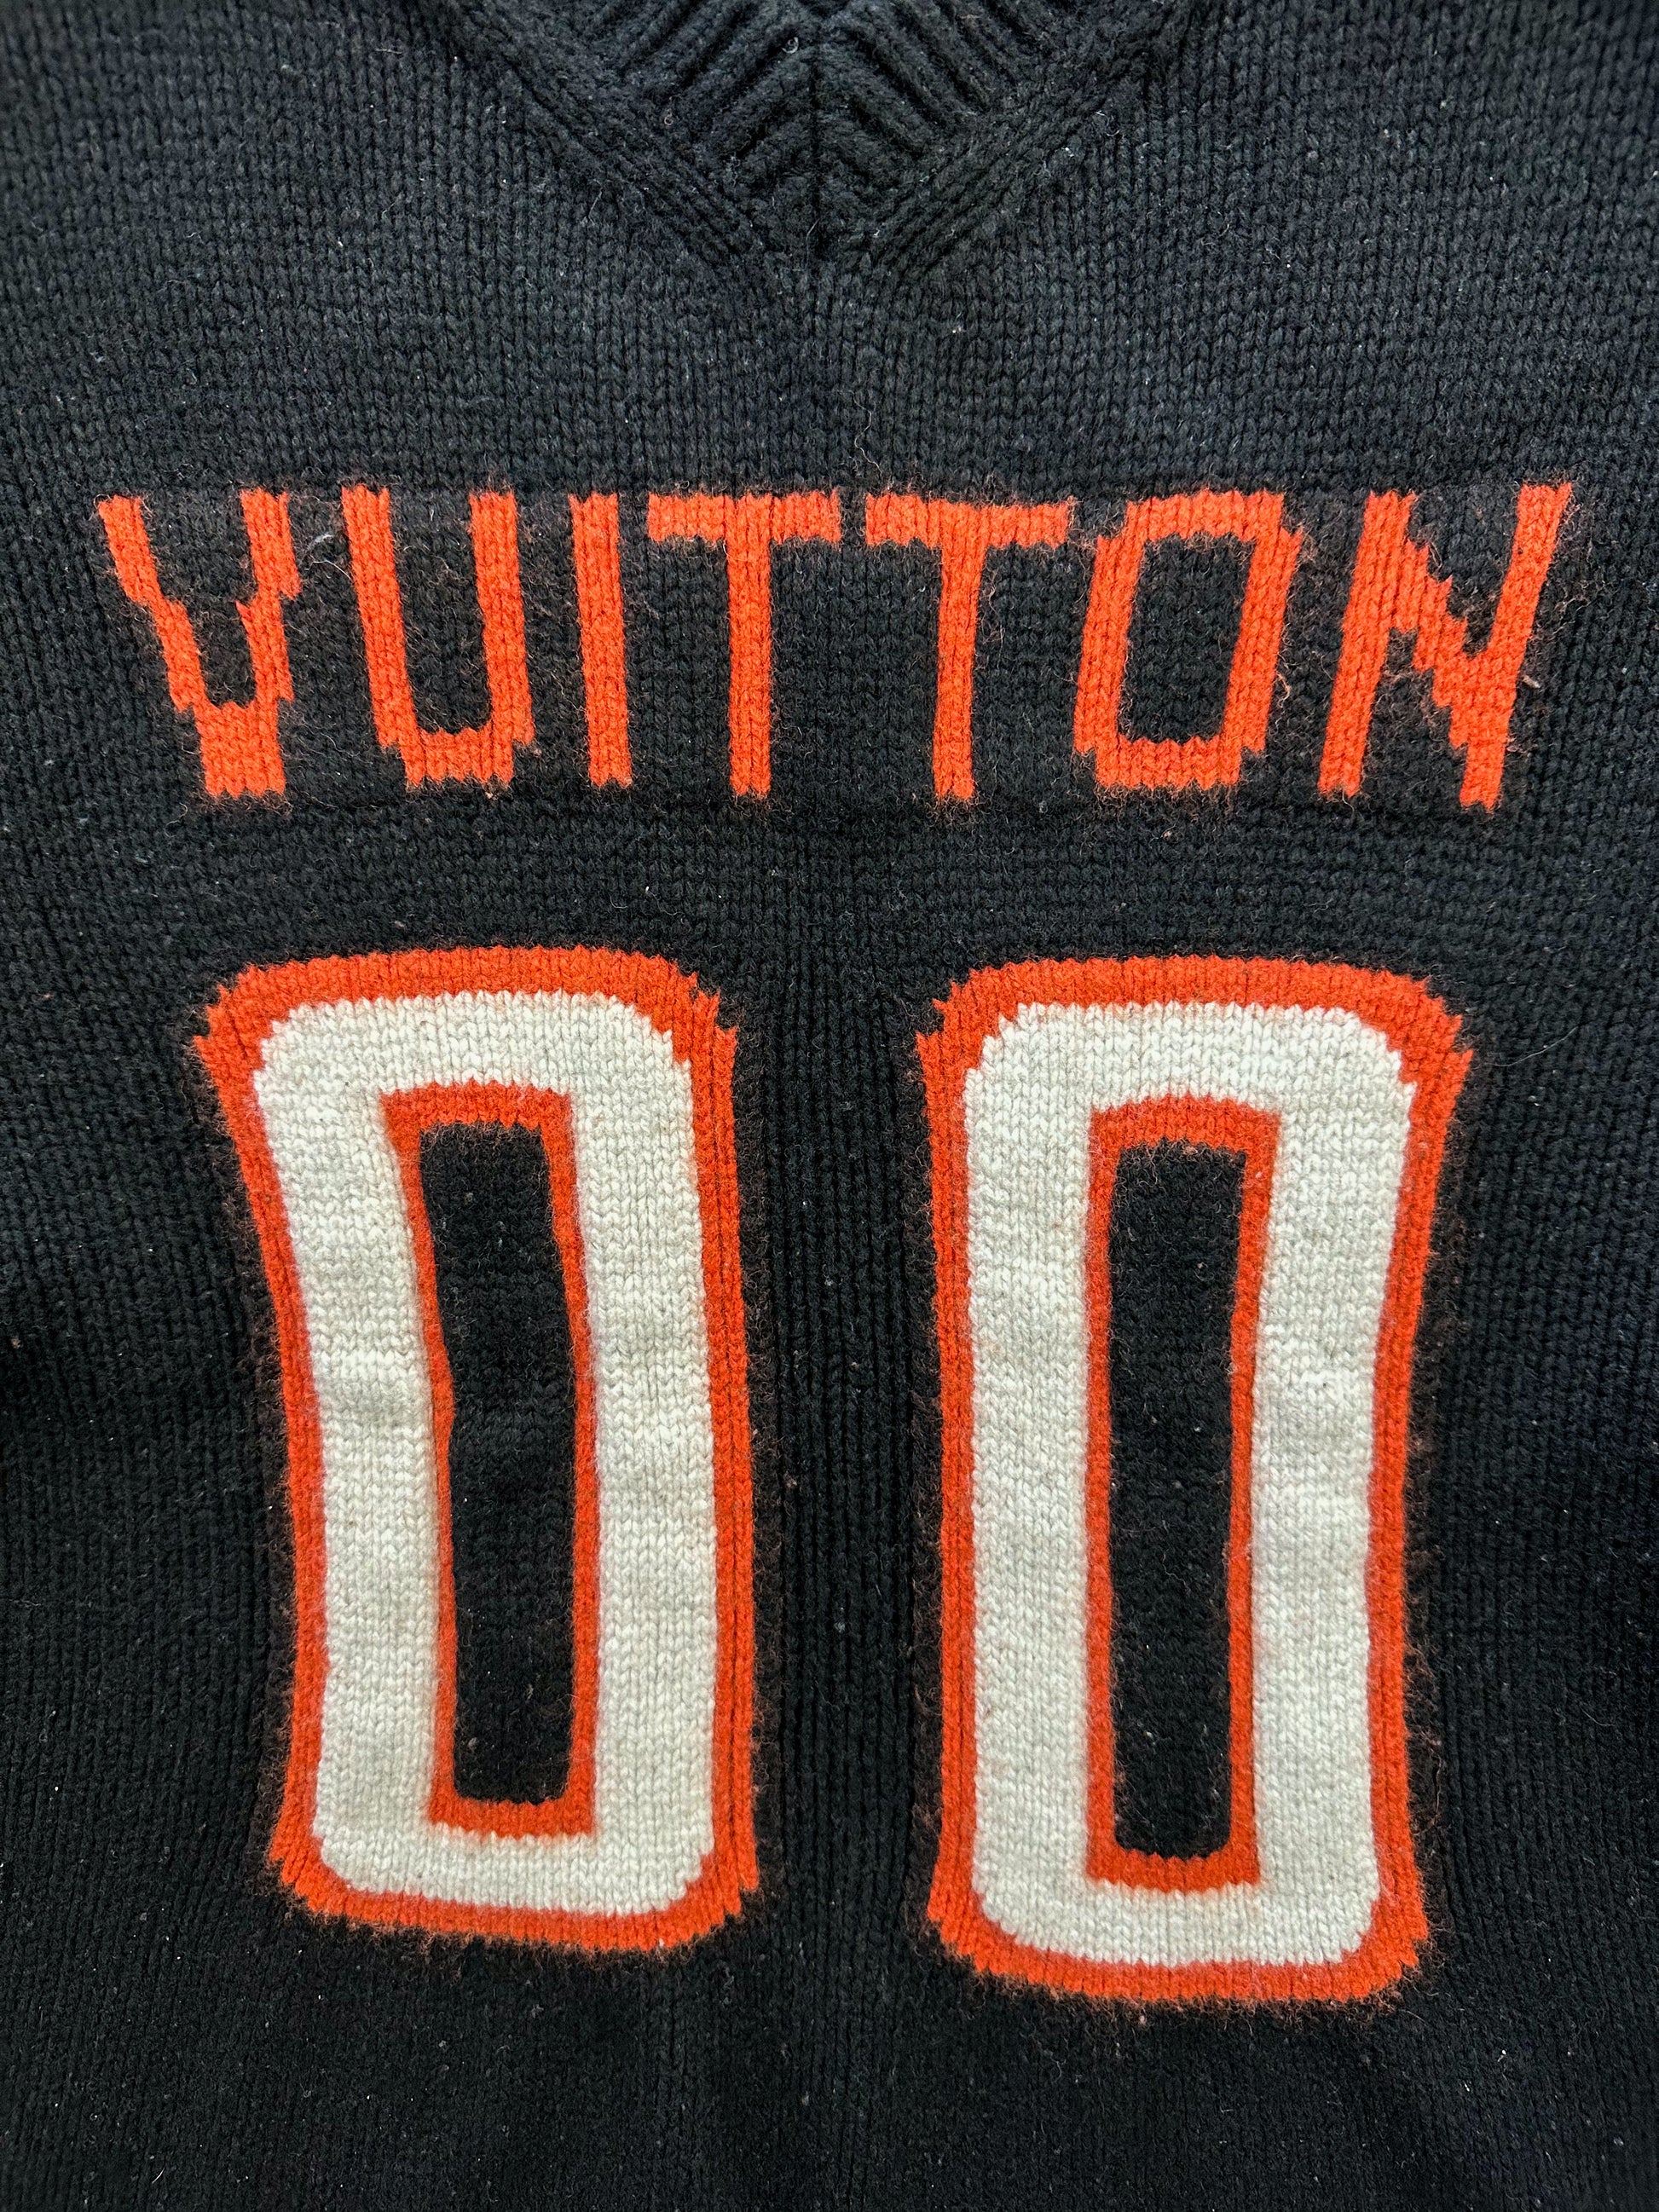 Louis Vuitton Louis vuitton charges football Jersey